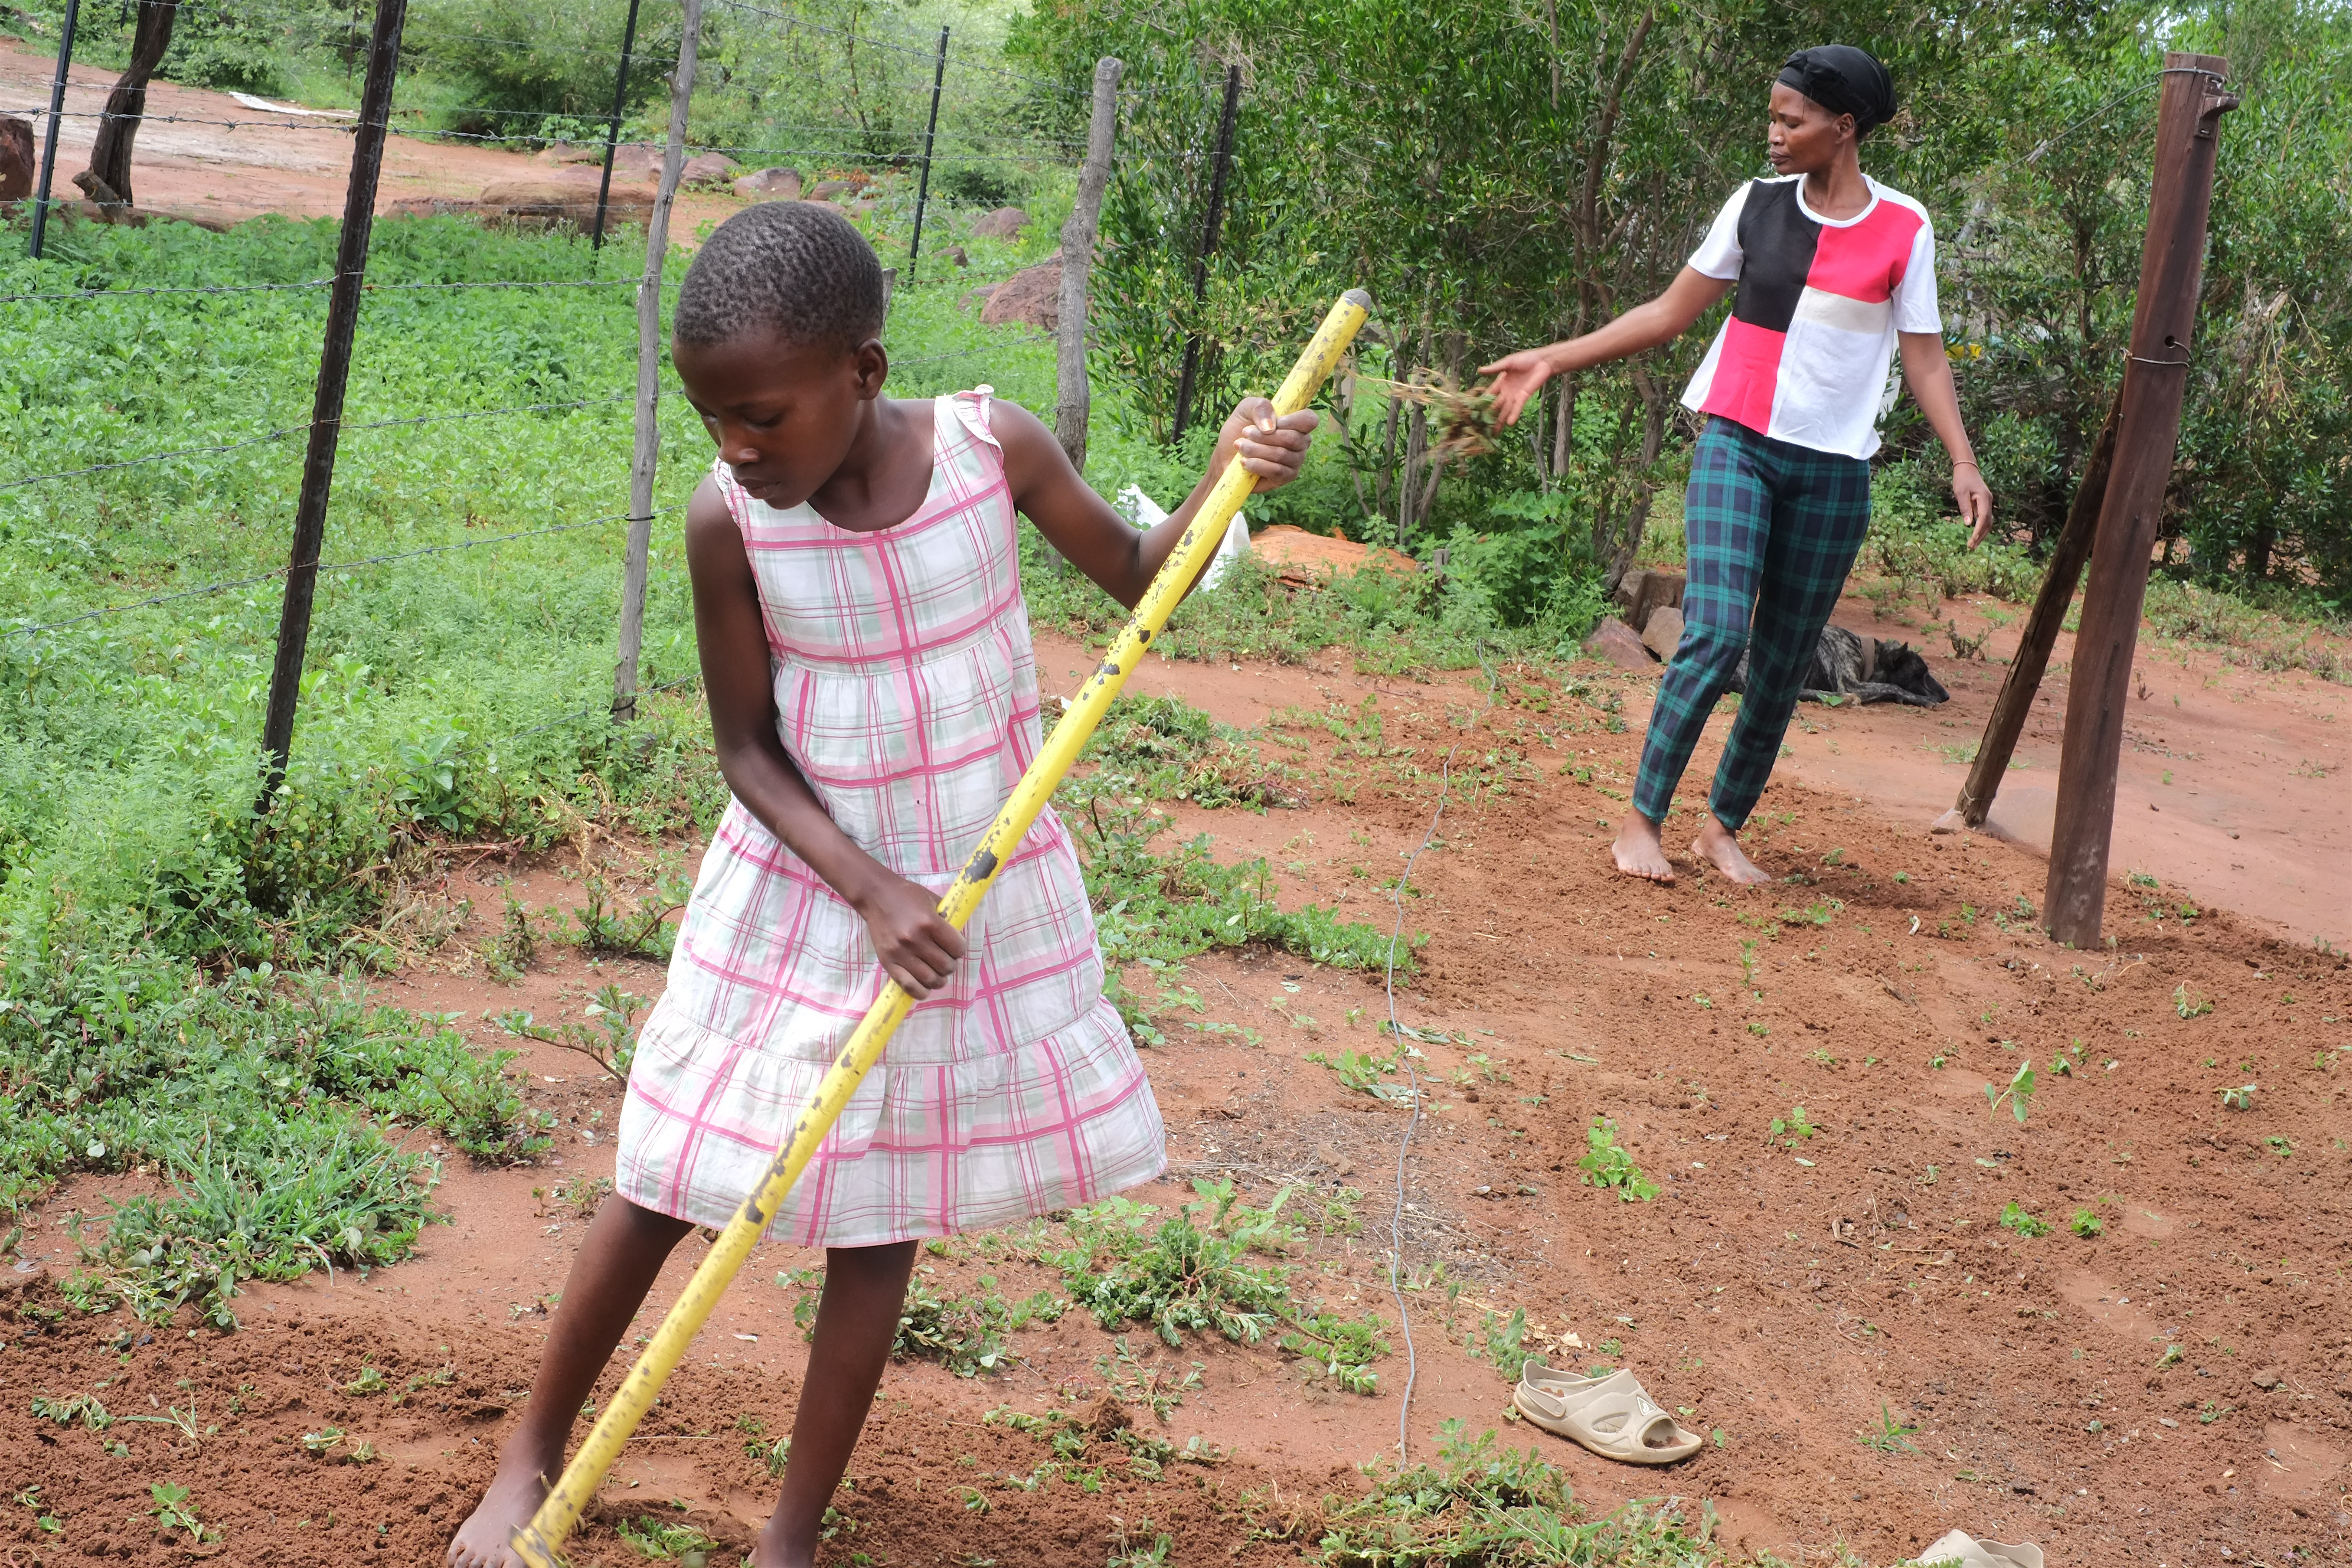 Gaolatlhe Kalanke and her daughter working the land outside their home. Photo Credit: UNAIDS